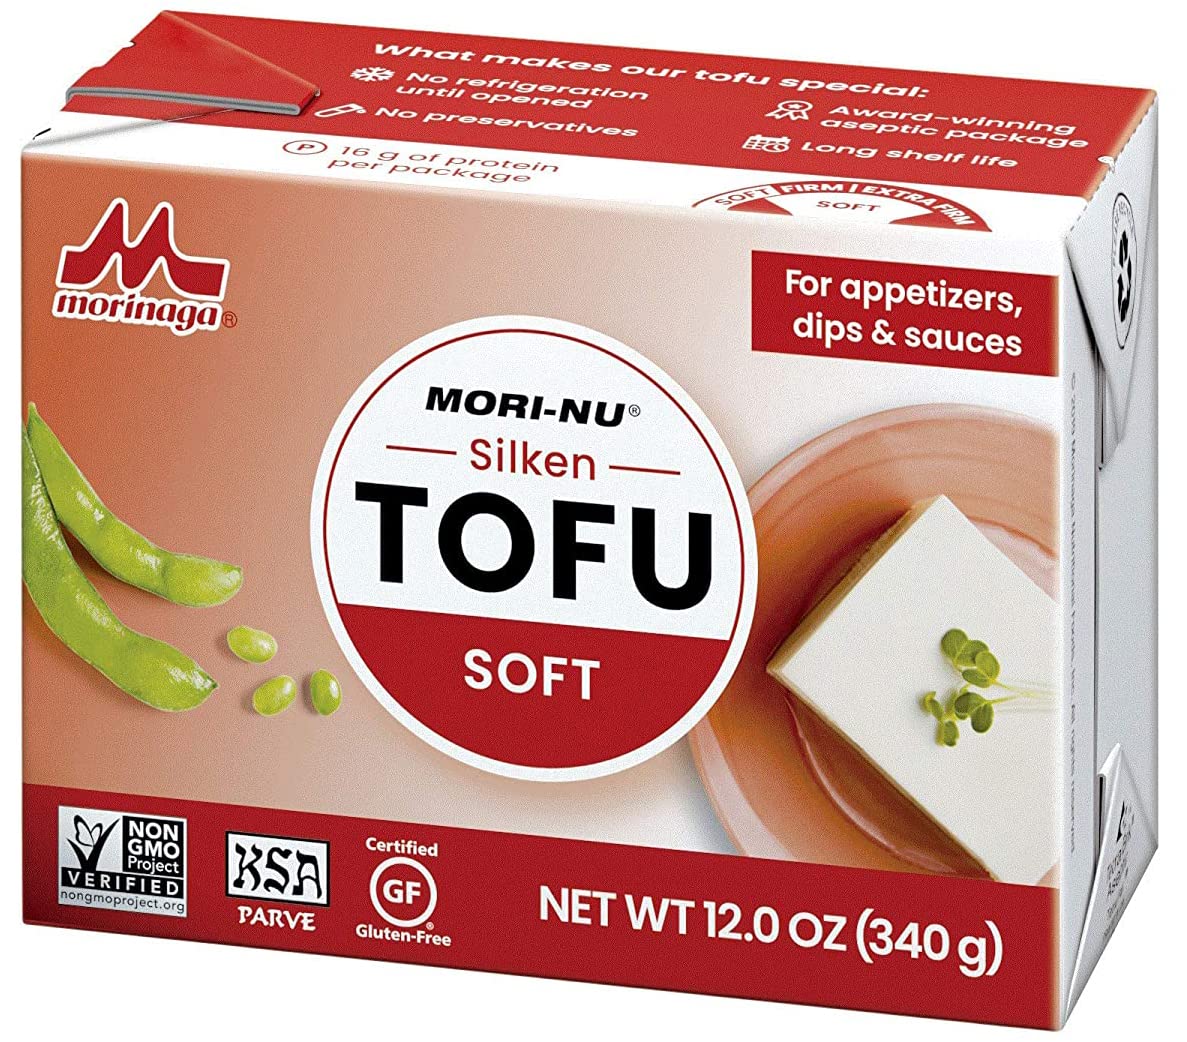 Mori-Nu Silken Tofu Soft | Velvety Smooth and Creamy | Low Fat, Gluten-Free, Dairy-Free, Vegan, Made with Non-GMO soybeans, KSA Kosher Parve | Shelf-Stable | Clean protein | 12oz x 12 Packs